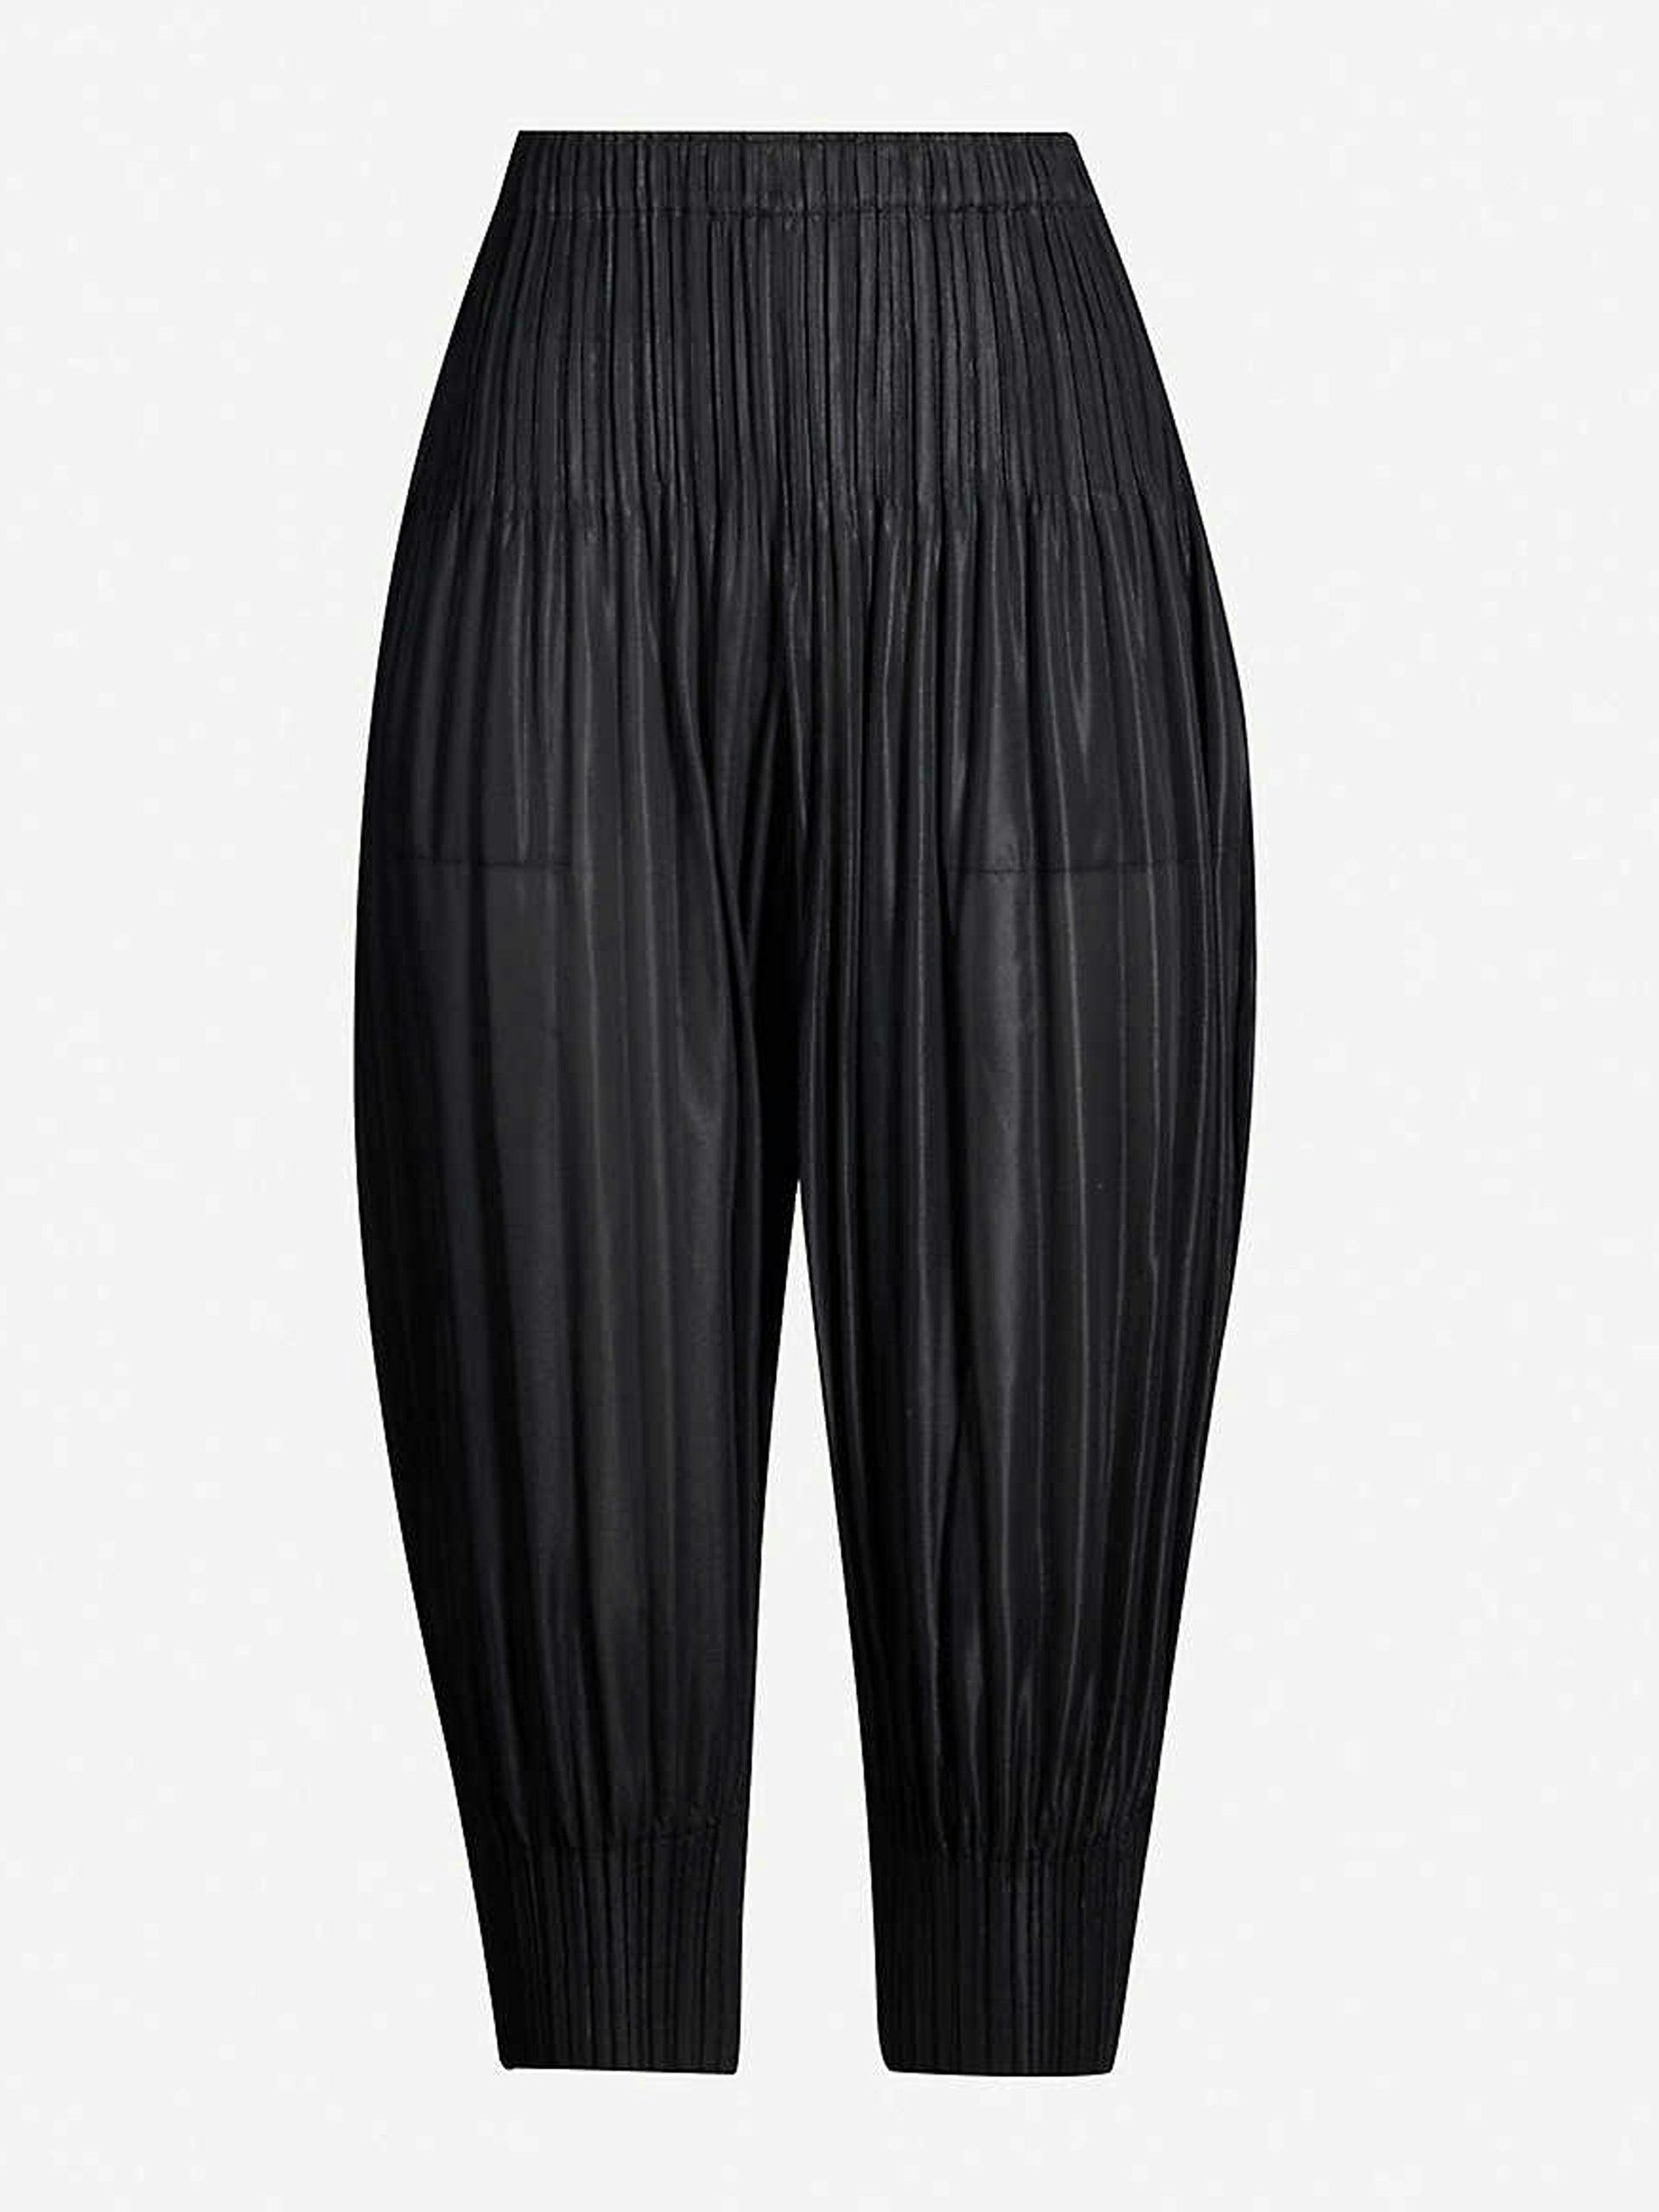 Black pleated jersey trousers